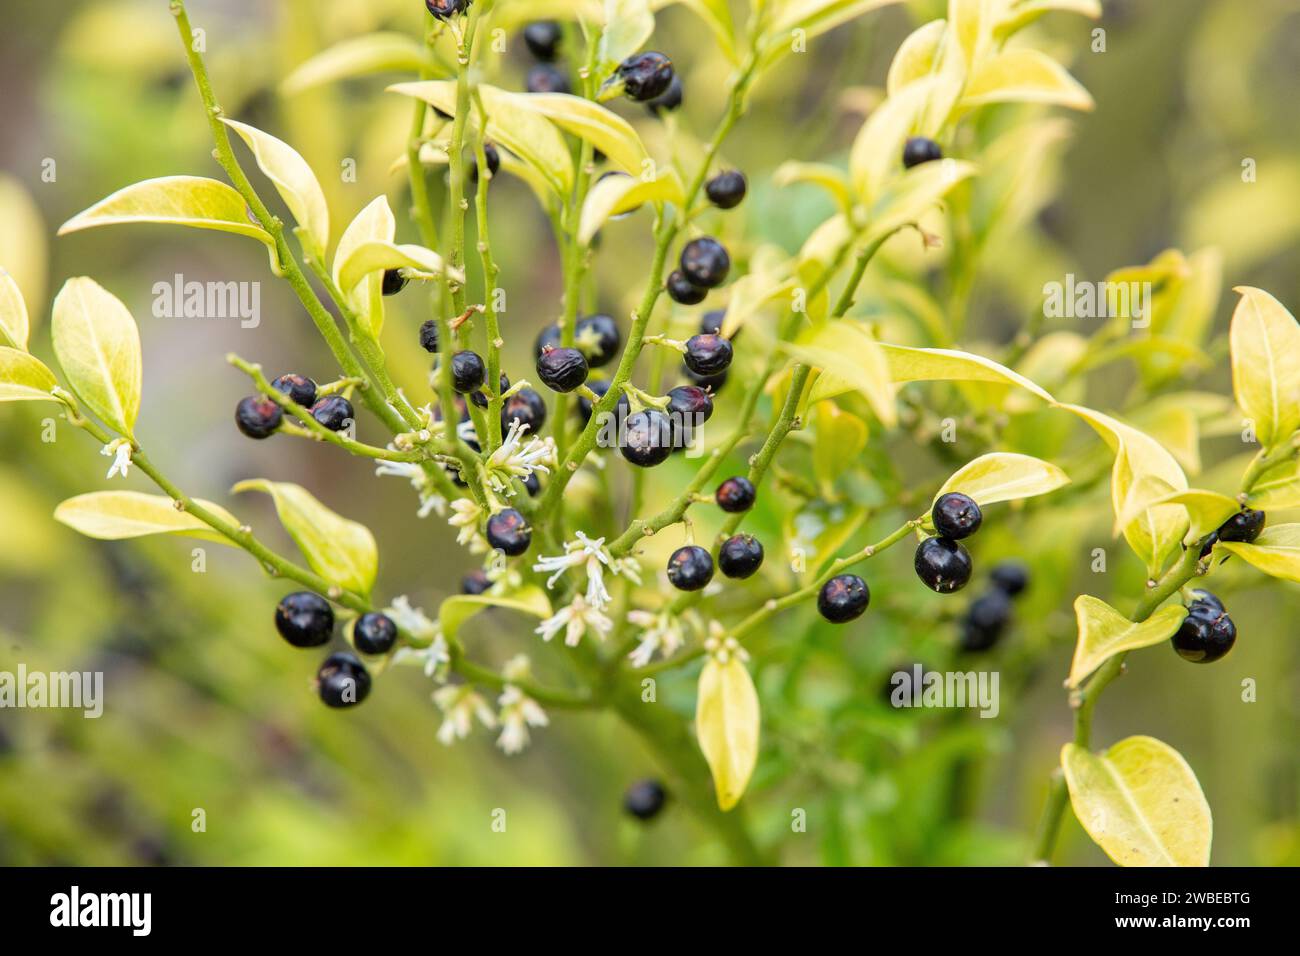 The berries and fragrant flowers of the Christmas Box plant in winter. (Sarcococca confusa - Sweet Box Sarcococca). Winter flowering evergreen shrub. Stock Photo